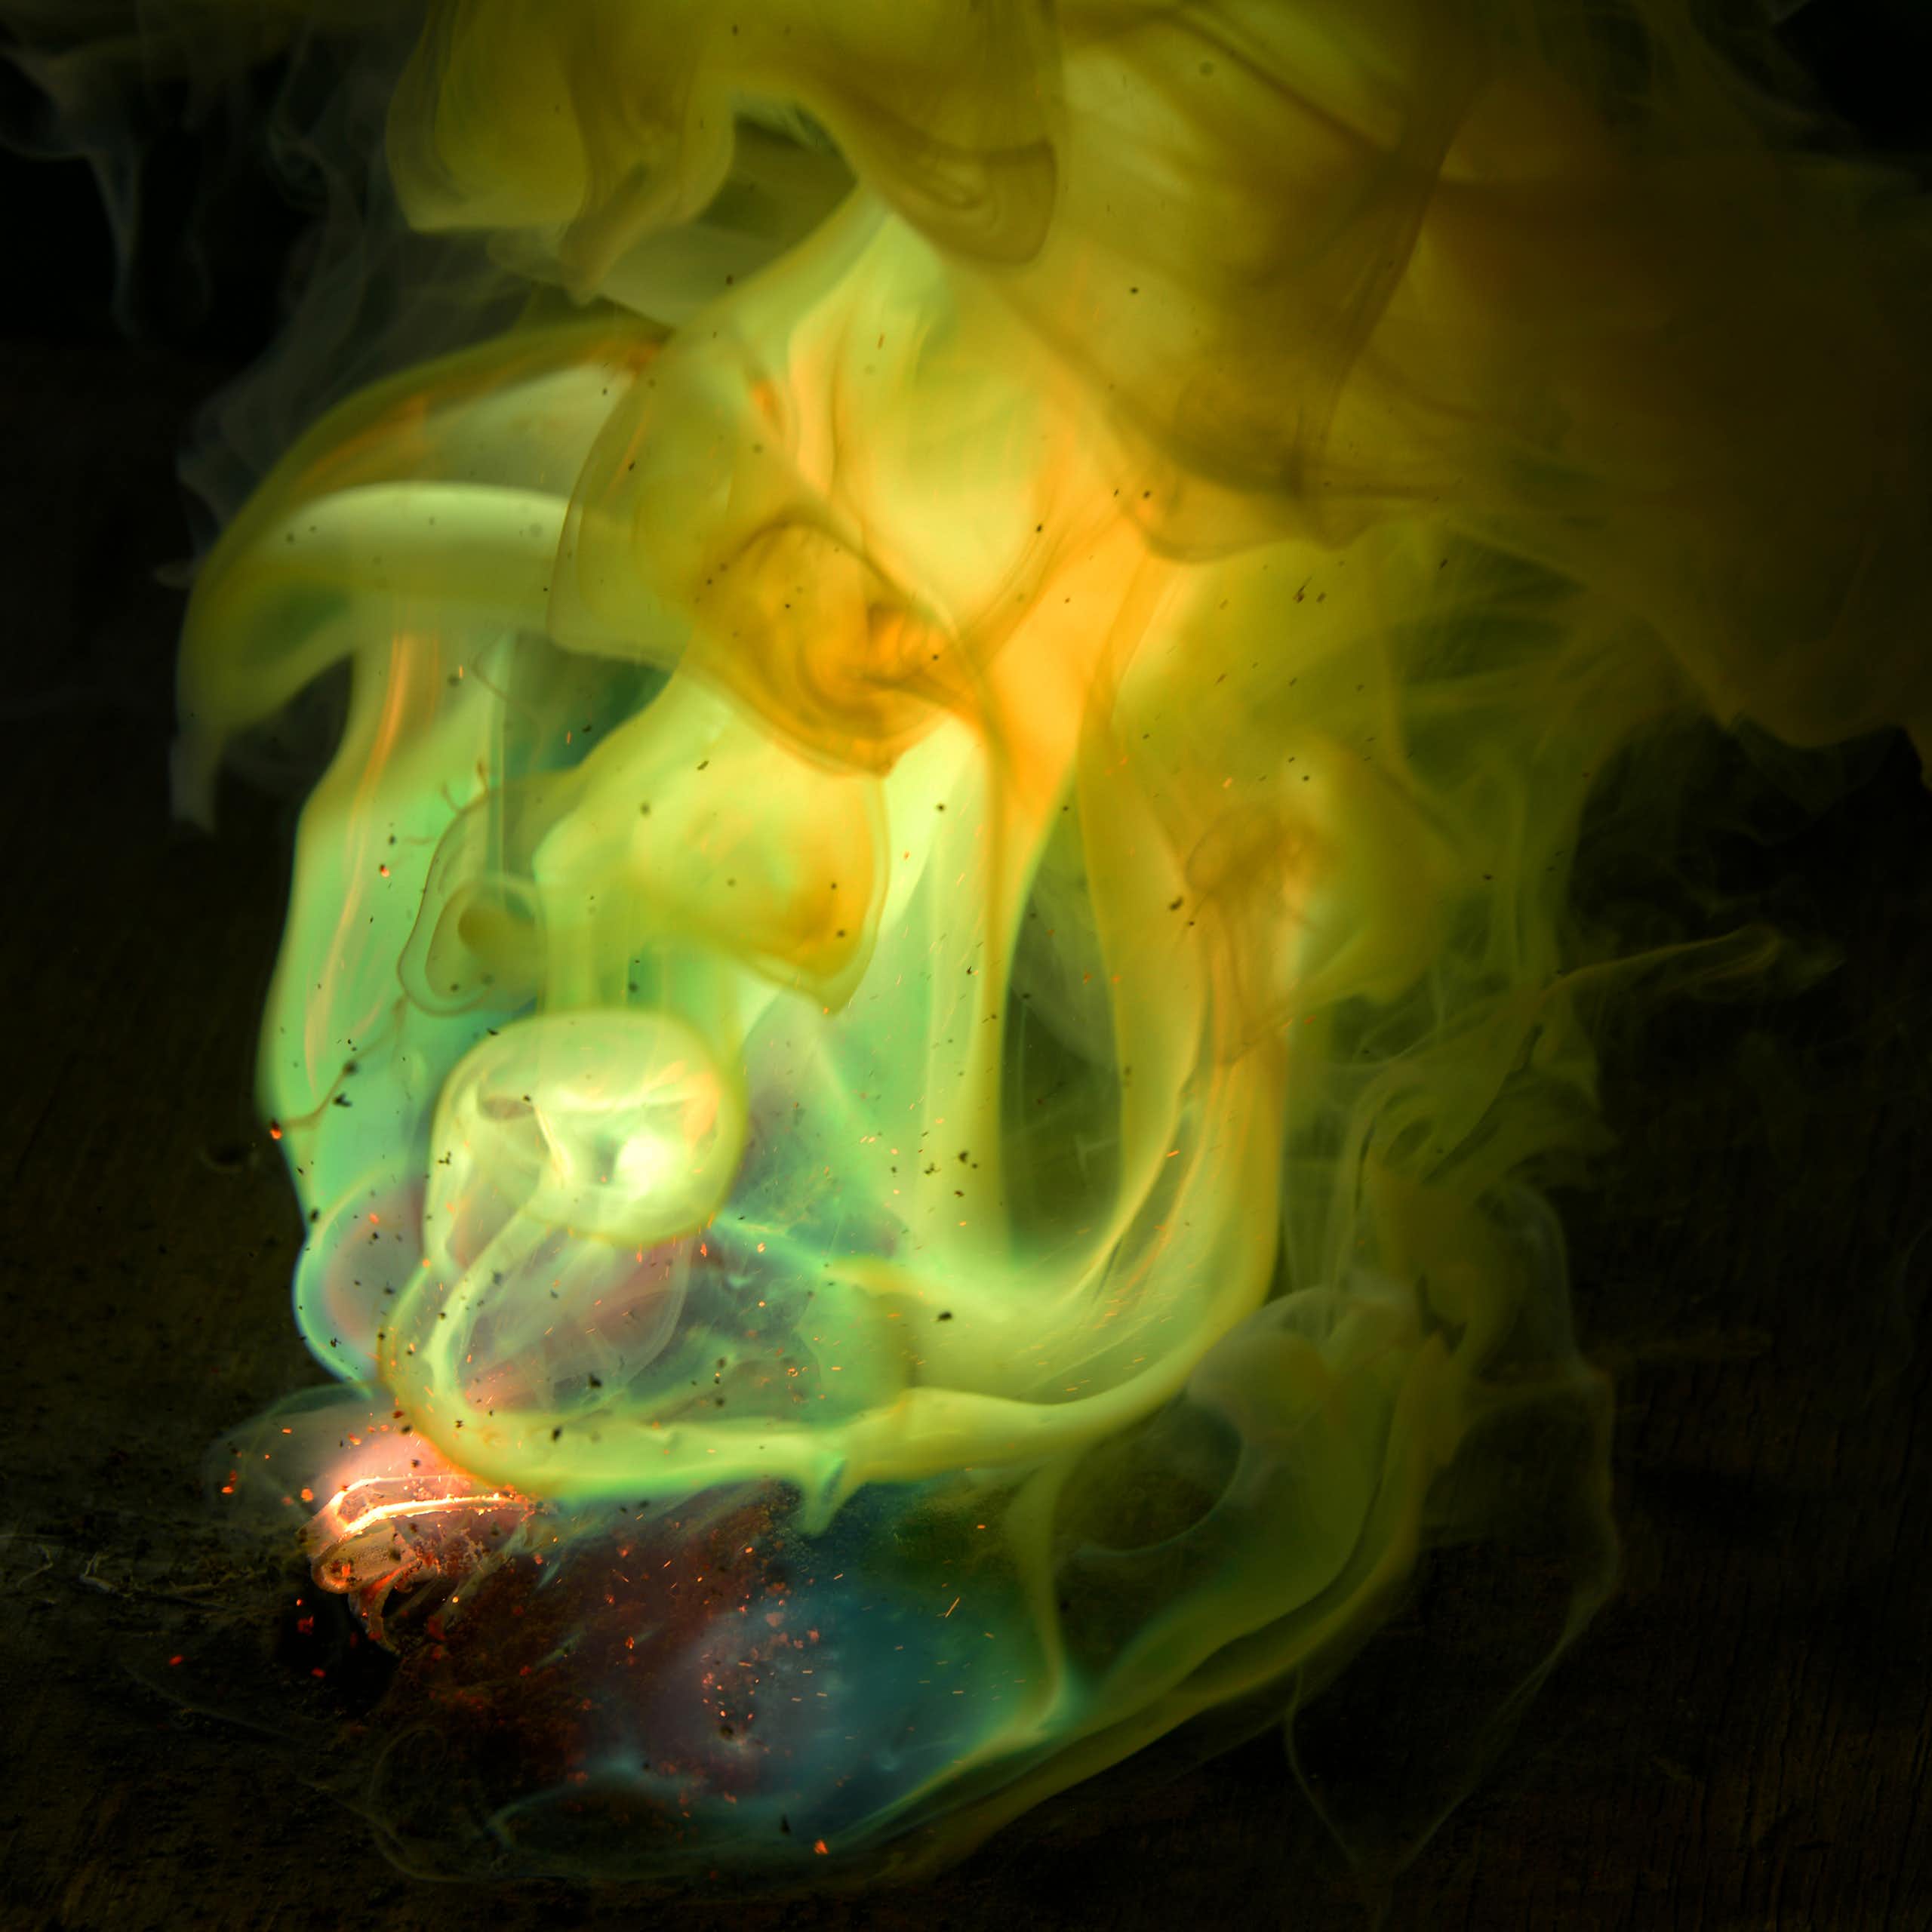 Photo of glowing greenish-yellow chemicals swirling against a dark background.